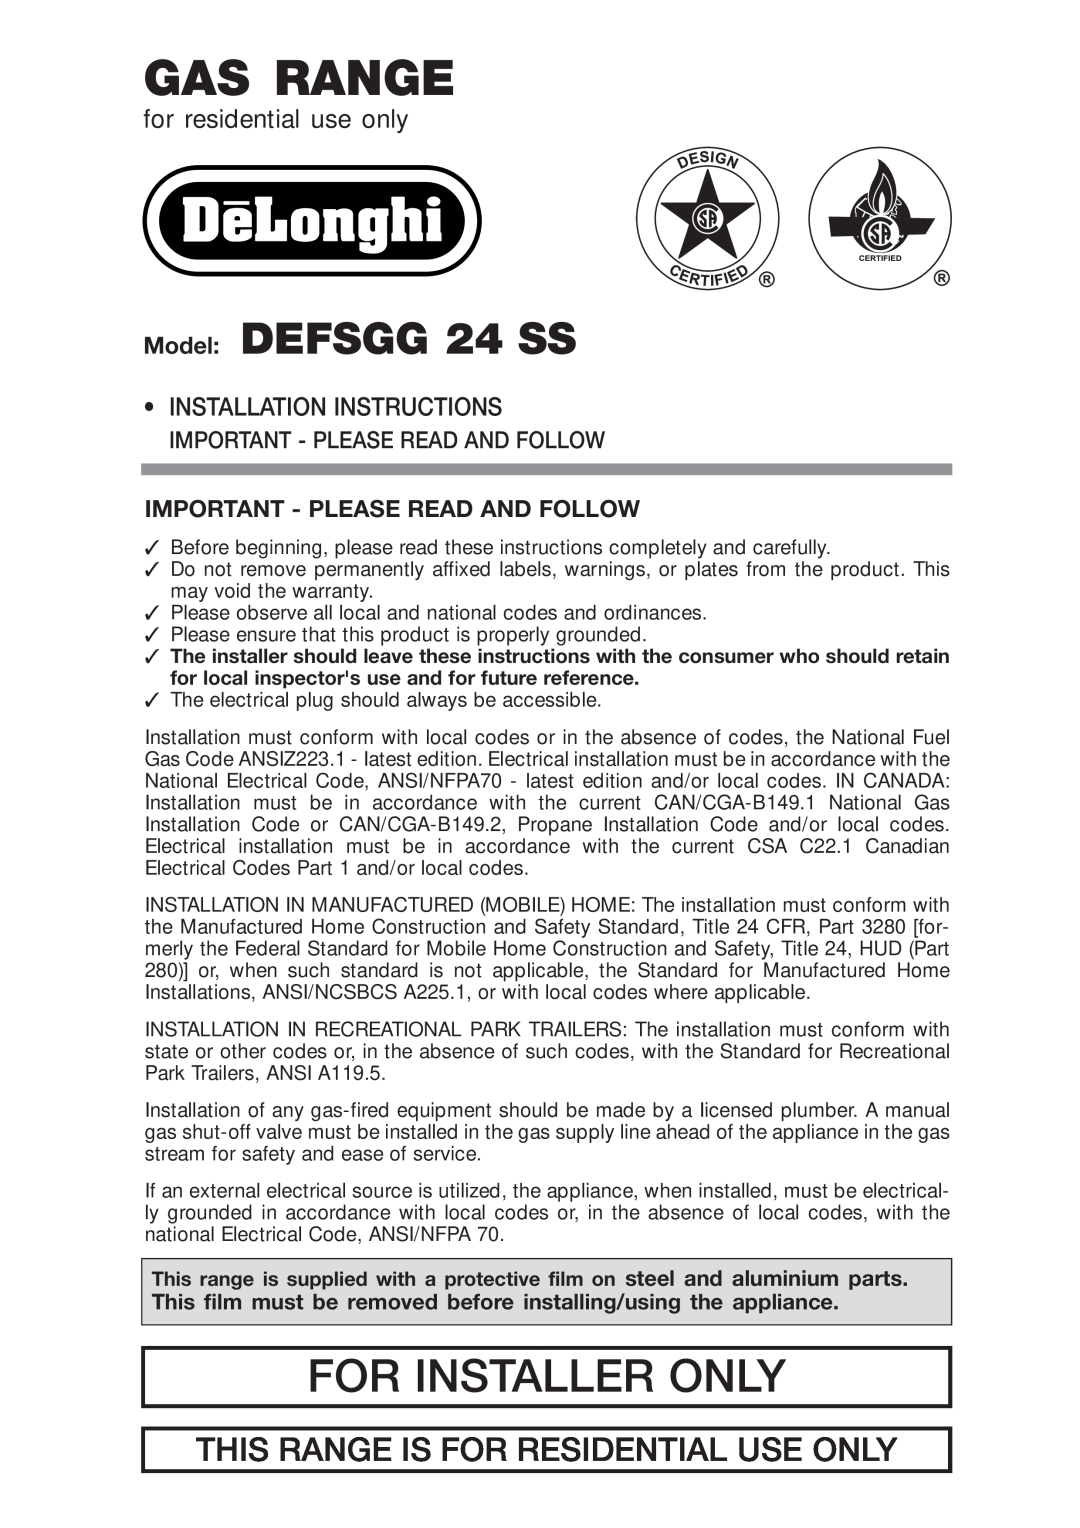 DeLonghi DEFSGG 24 SS installation instructions Important - Please Read And Follow, Gas Range, For Installer Only 